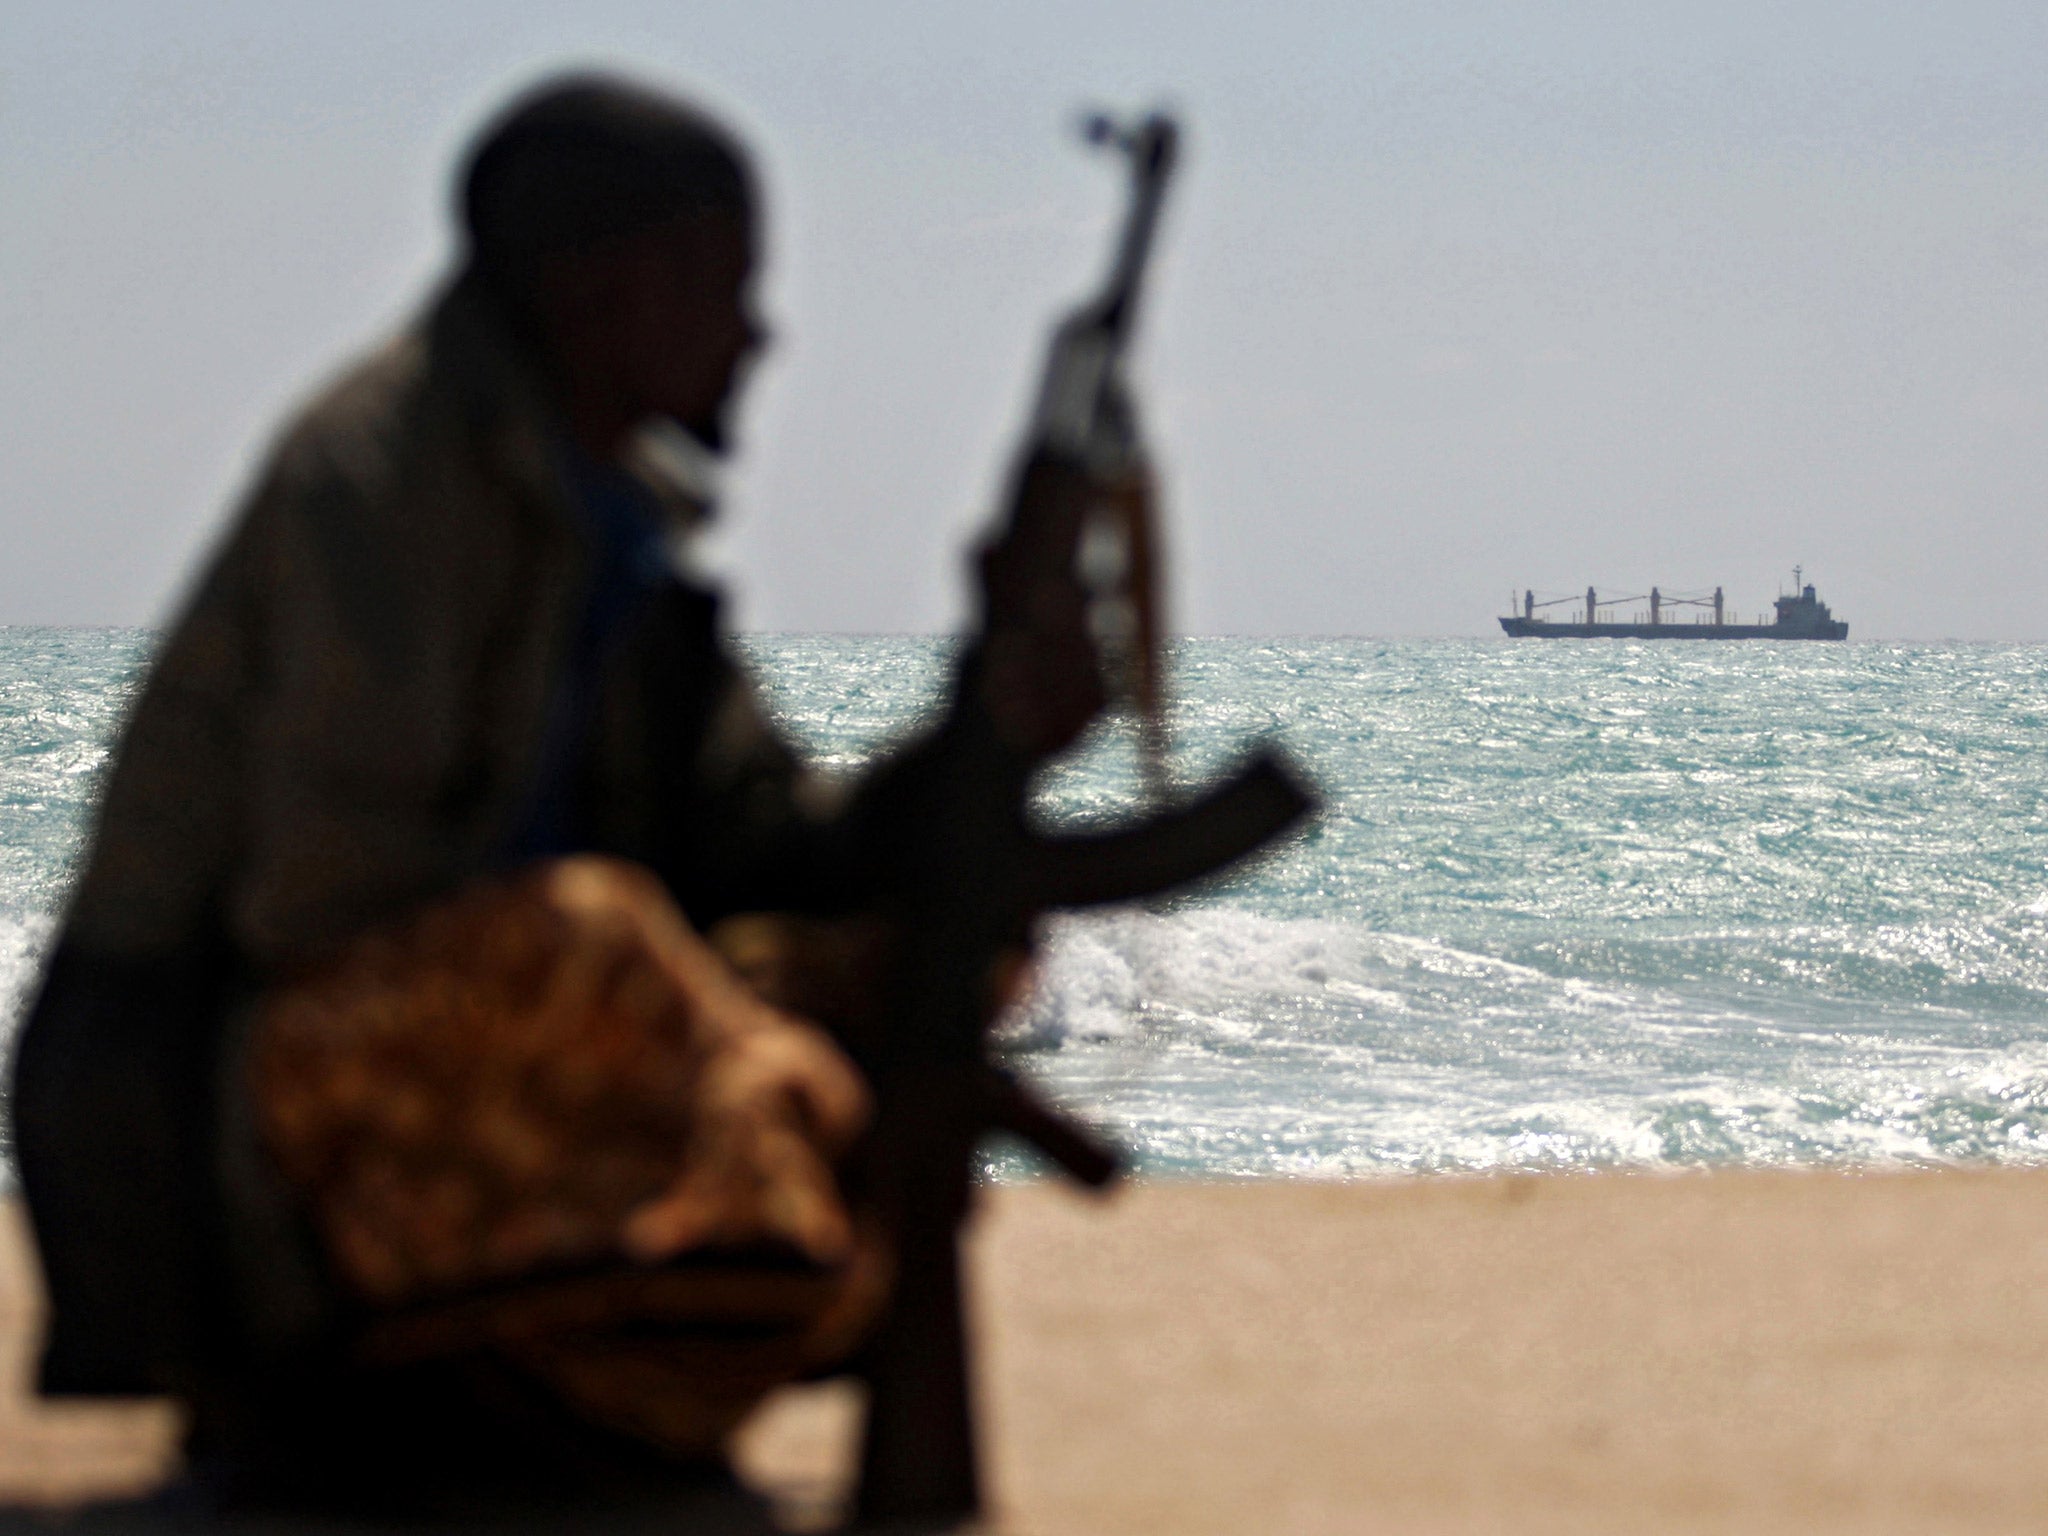 An armed Somali pirate, pictured in 2010